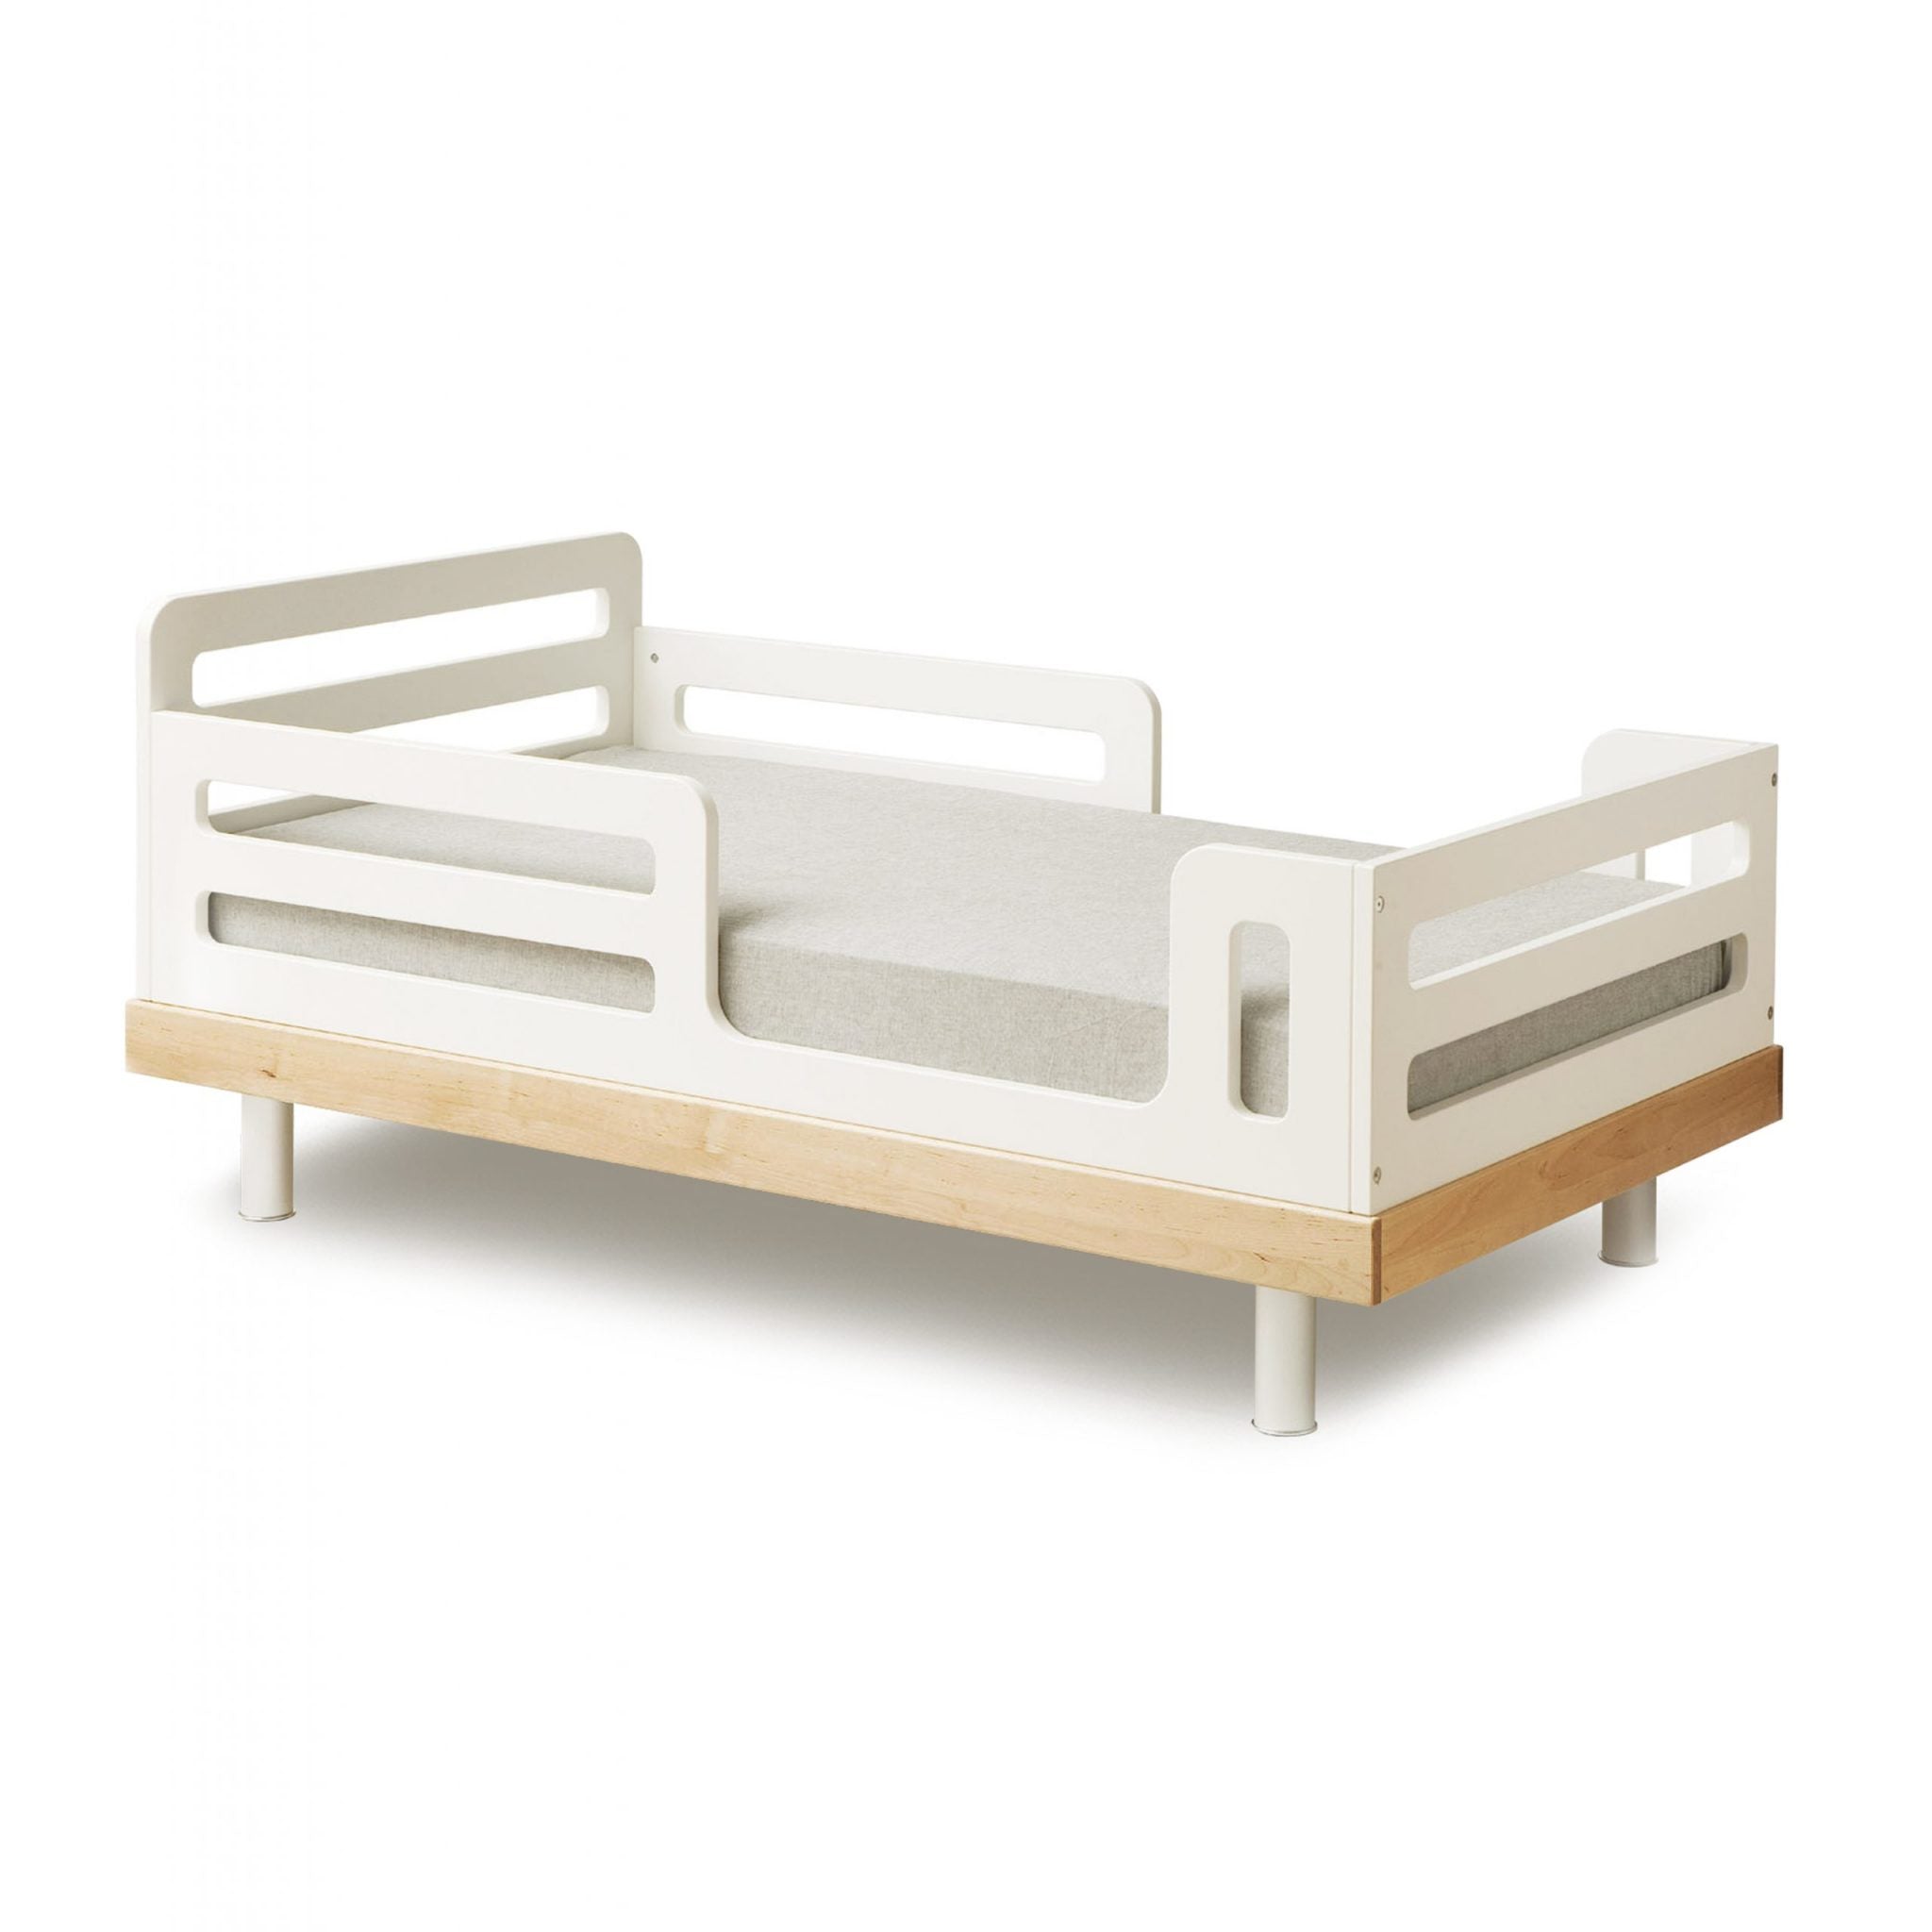 Oeuf classic toddler bed